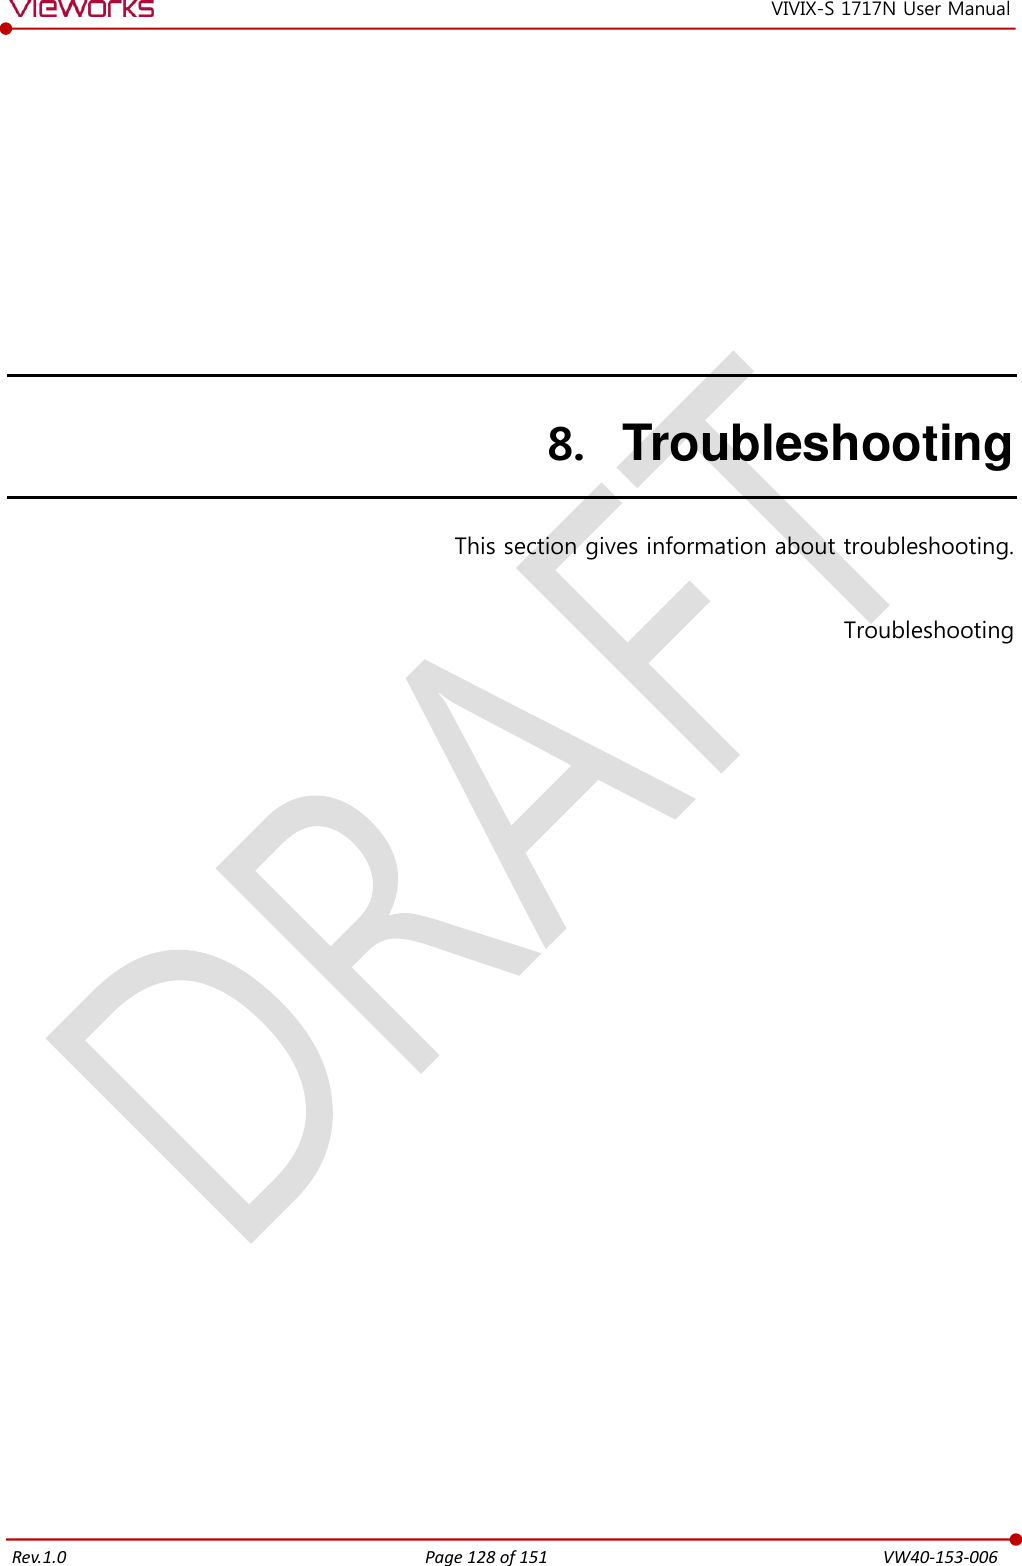   Rev.1.0 Page 128 of 151  VW40-153-006 VIVIX-S 1717N User Manual 8. Troubleshooting   This section gives information about troubleshooting.  Troubleshooting  